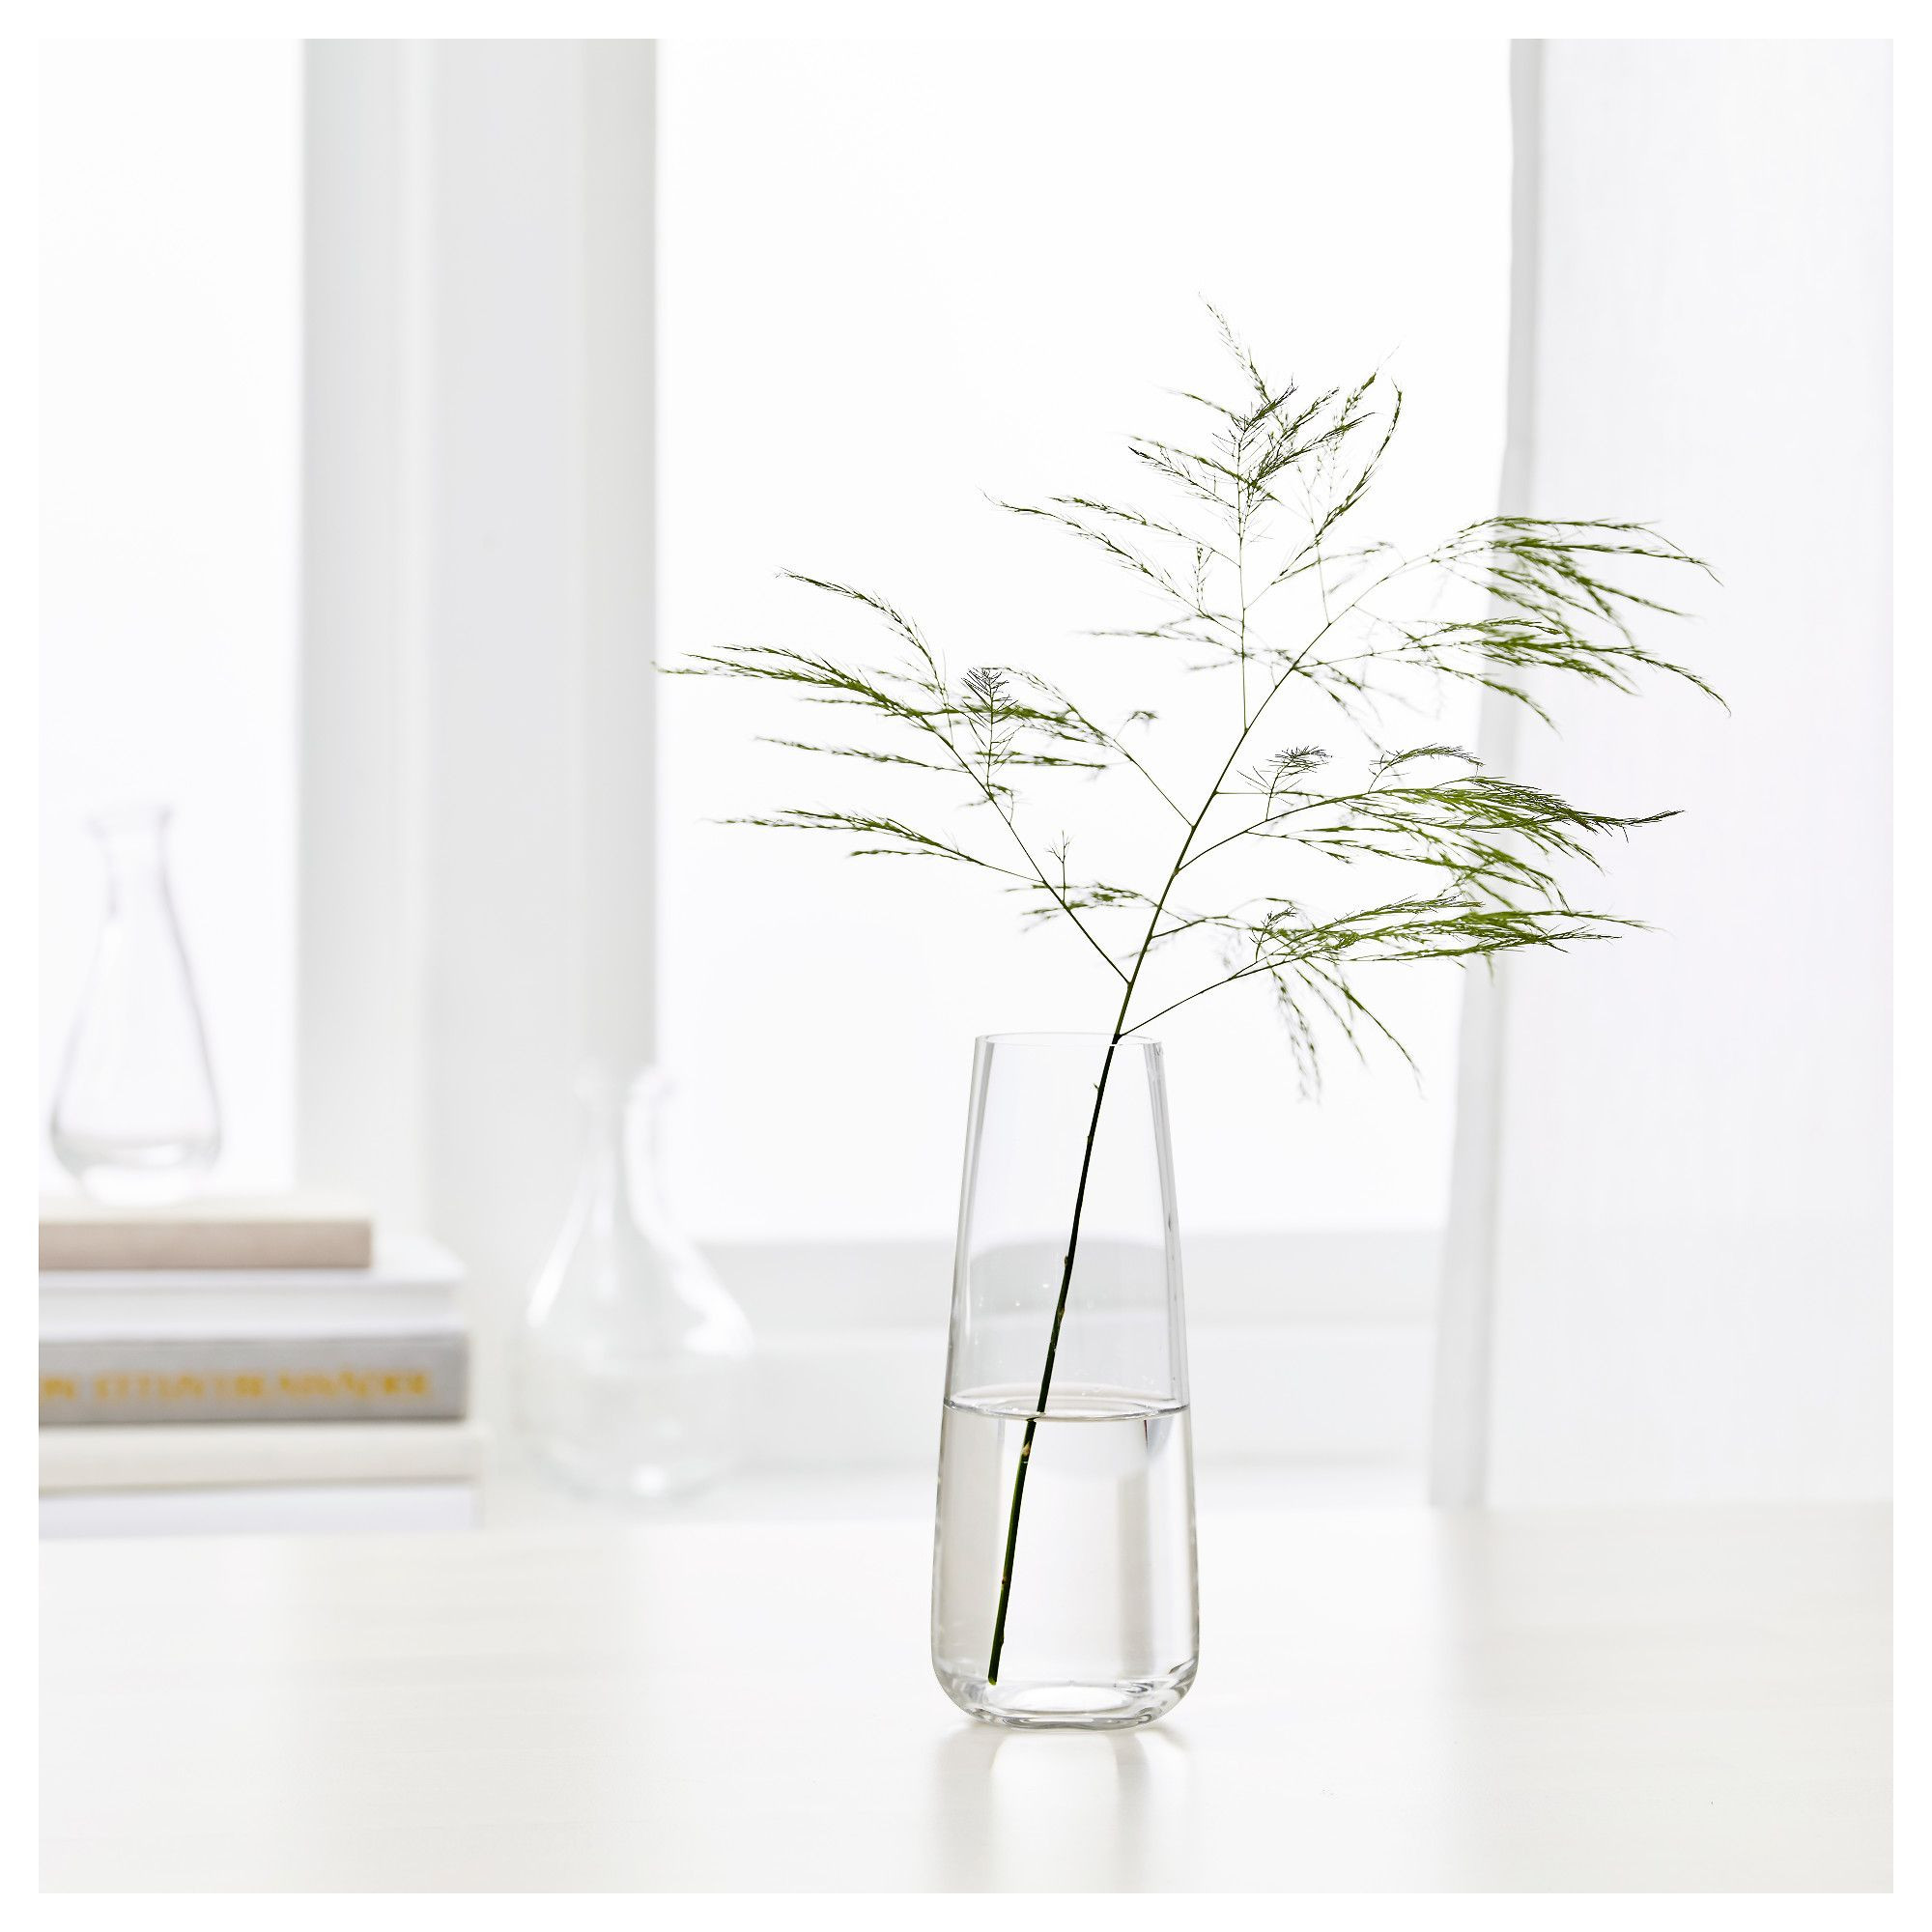 28 Awesome Short Glass Cylinder Vases 2023 free download short glass cylinder vases of ikea berac284kna vase clear glass cag 60 pinterest with regard to ikea berac284kna vase you can easily make a beautiful floral arrangement with just a single fl